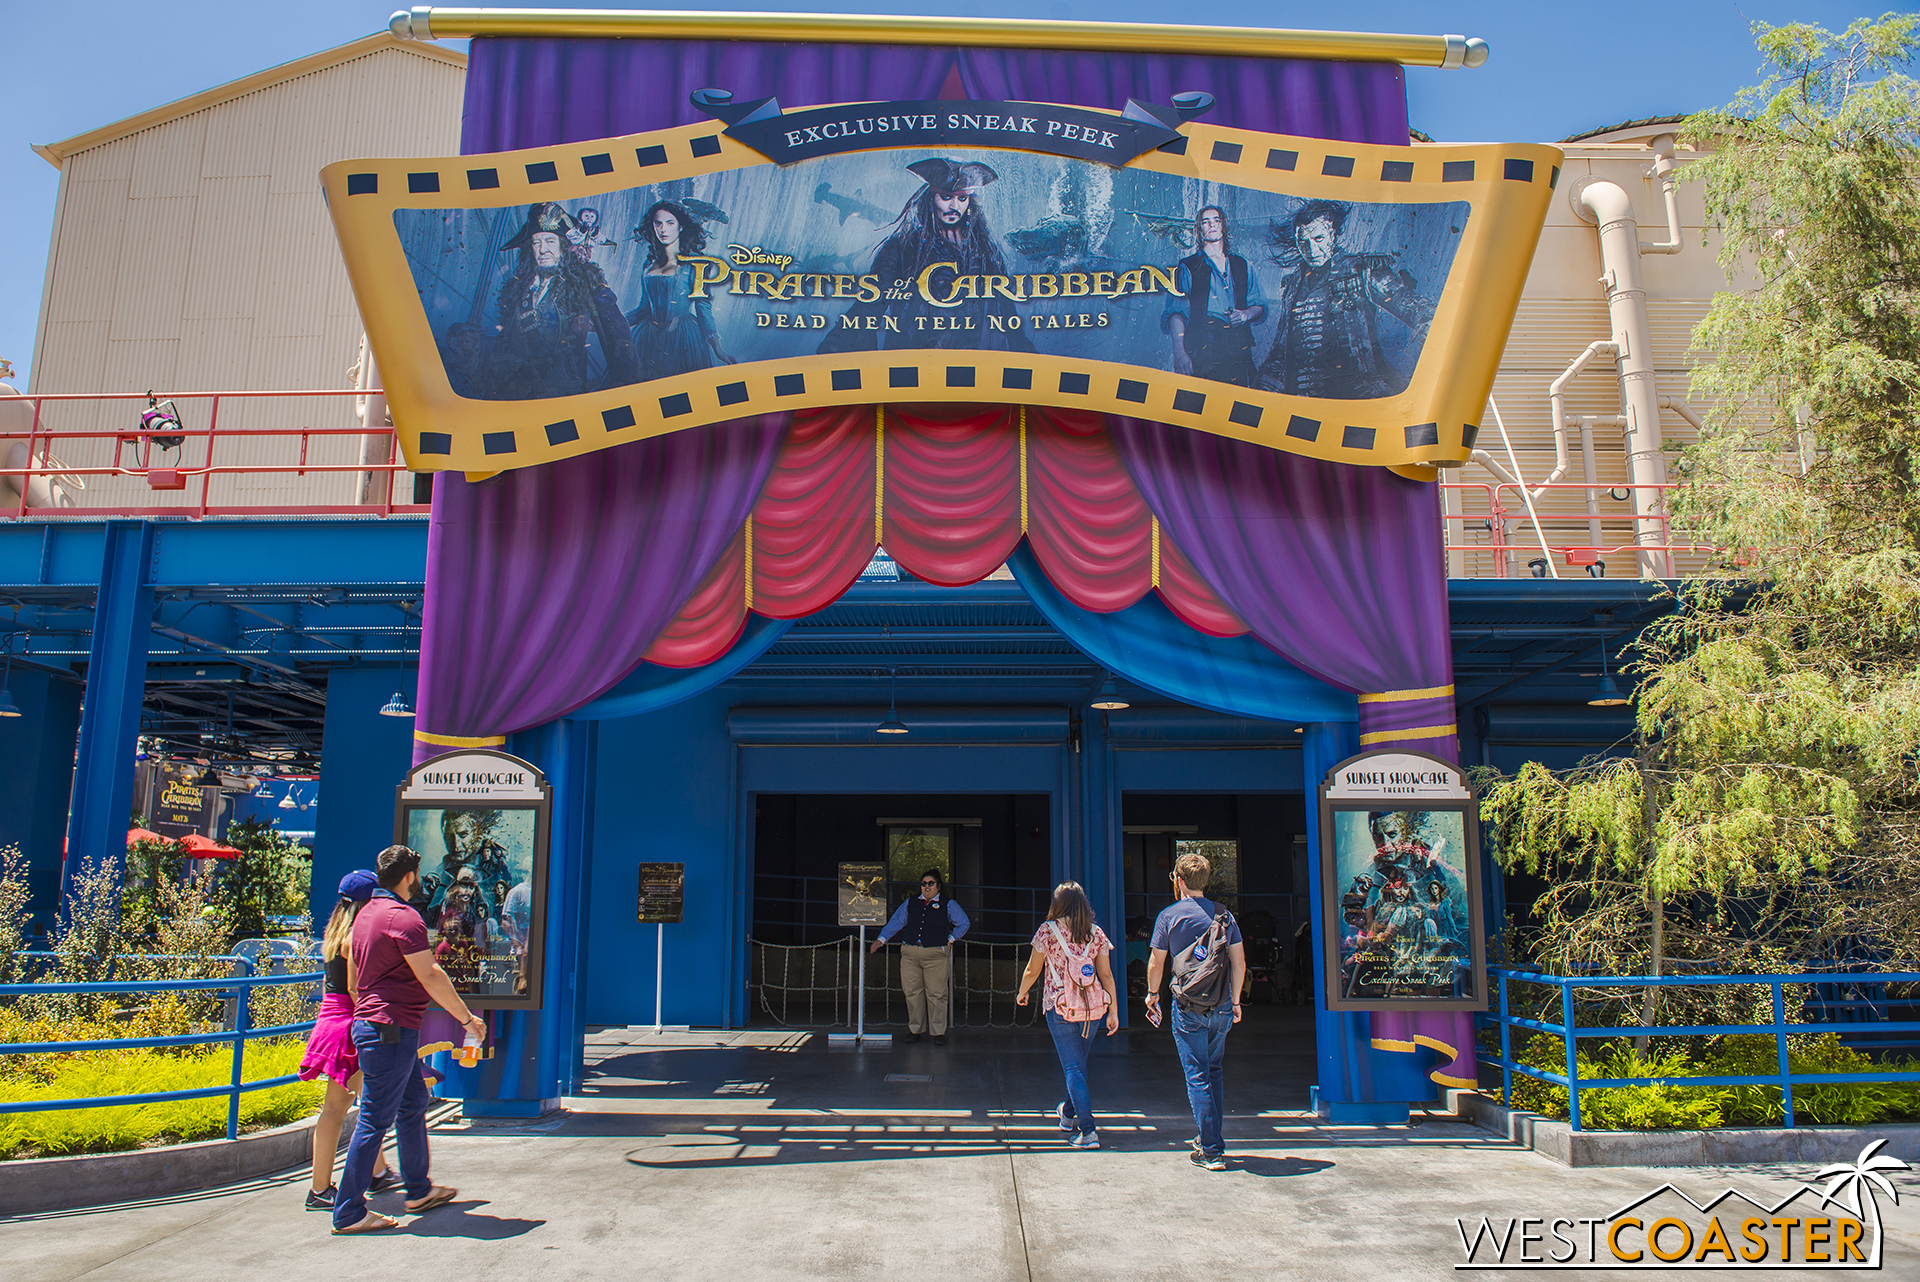  If you want an extended preview of the new Pirates movie, check it out in the old MuppetVision Theater in Hollywood Land. 